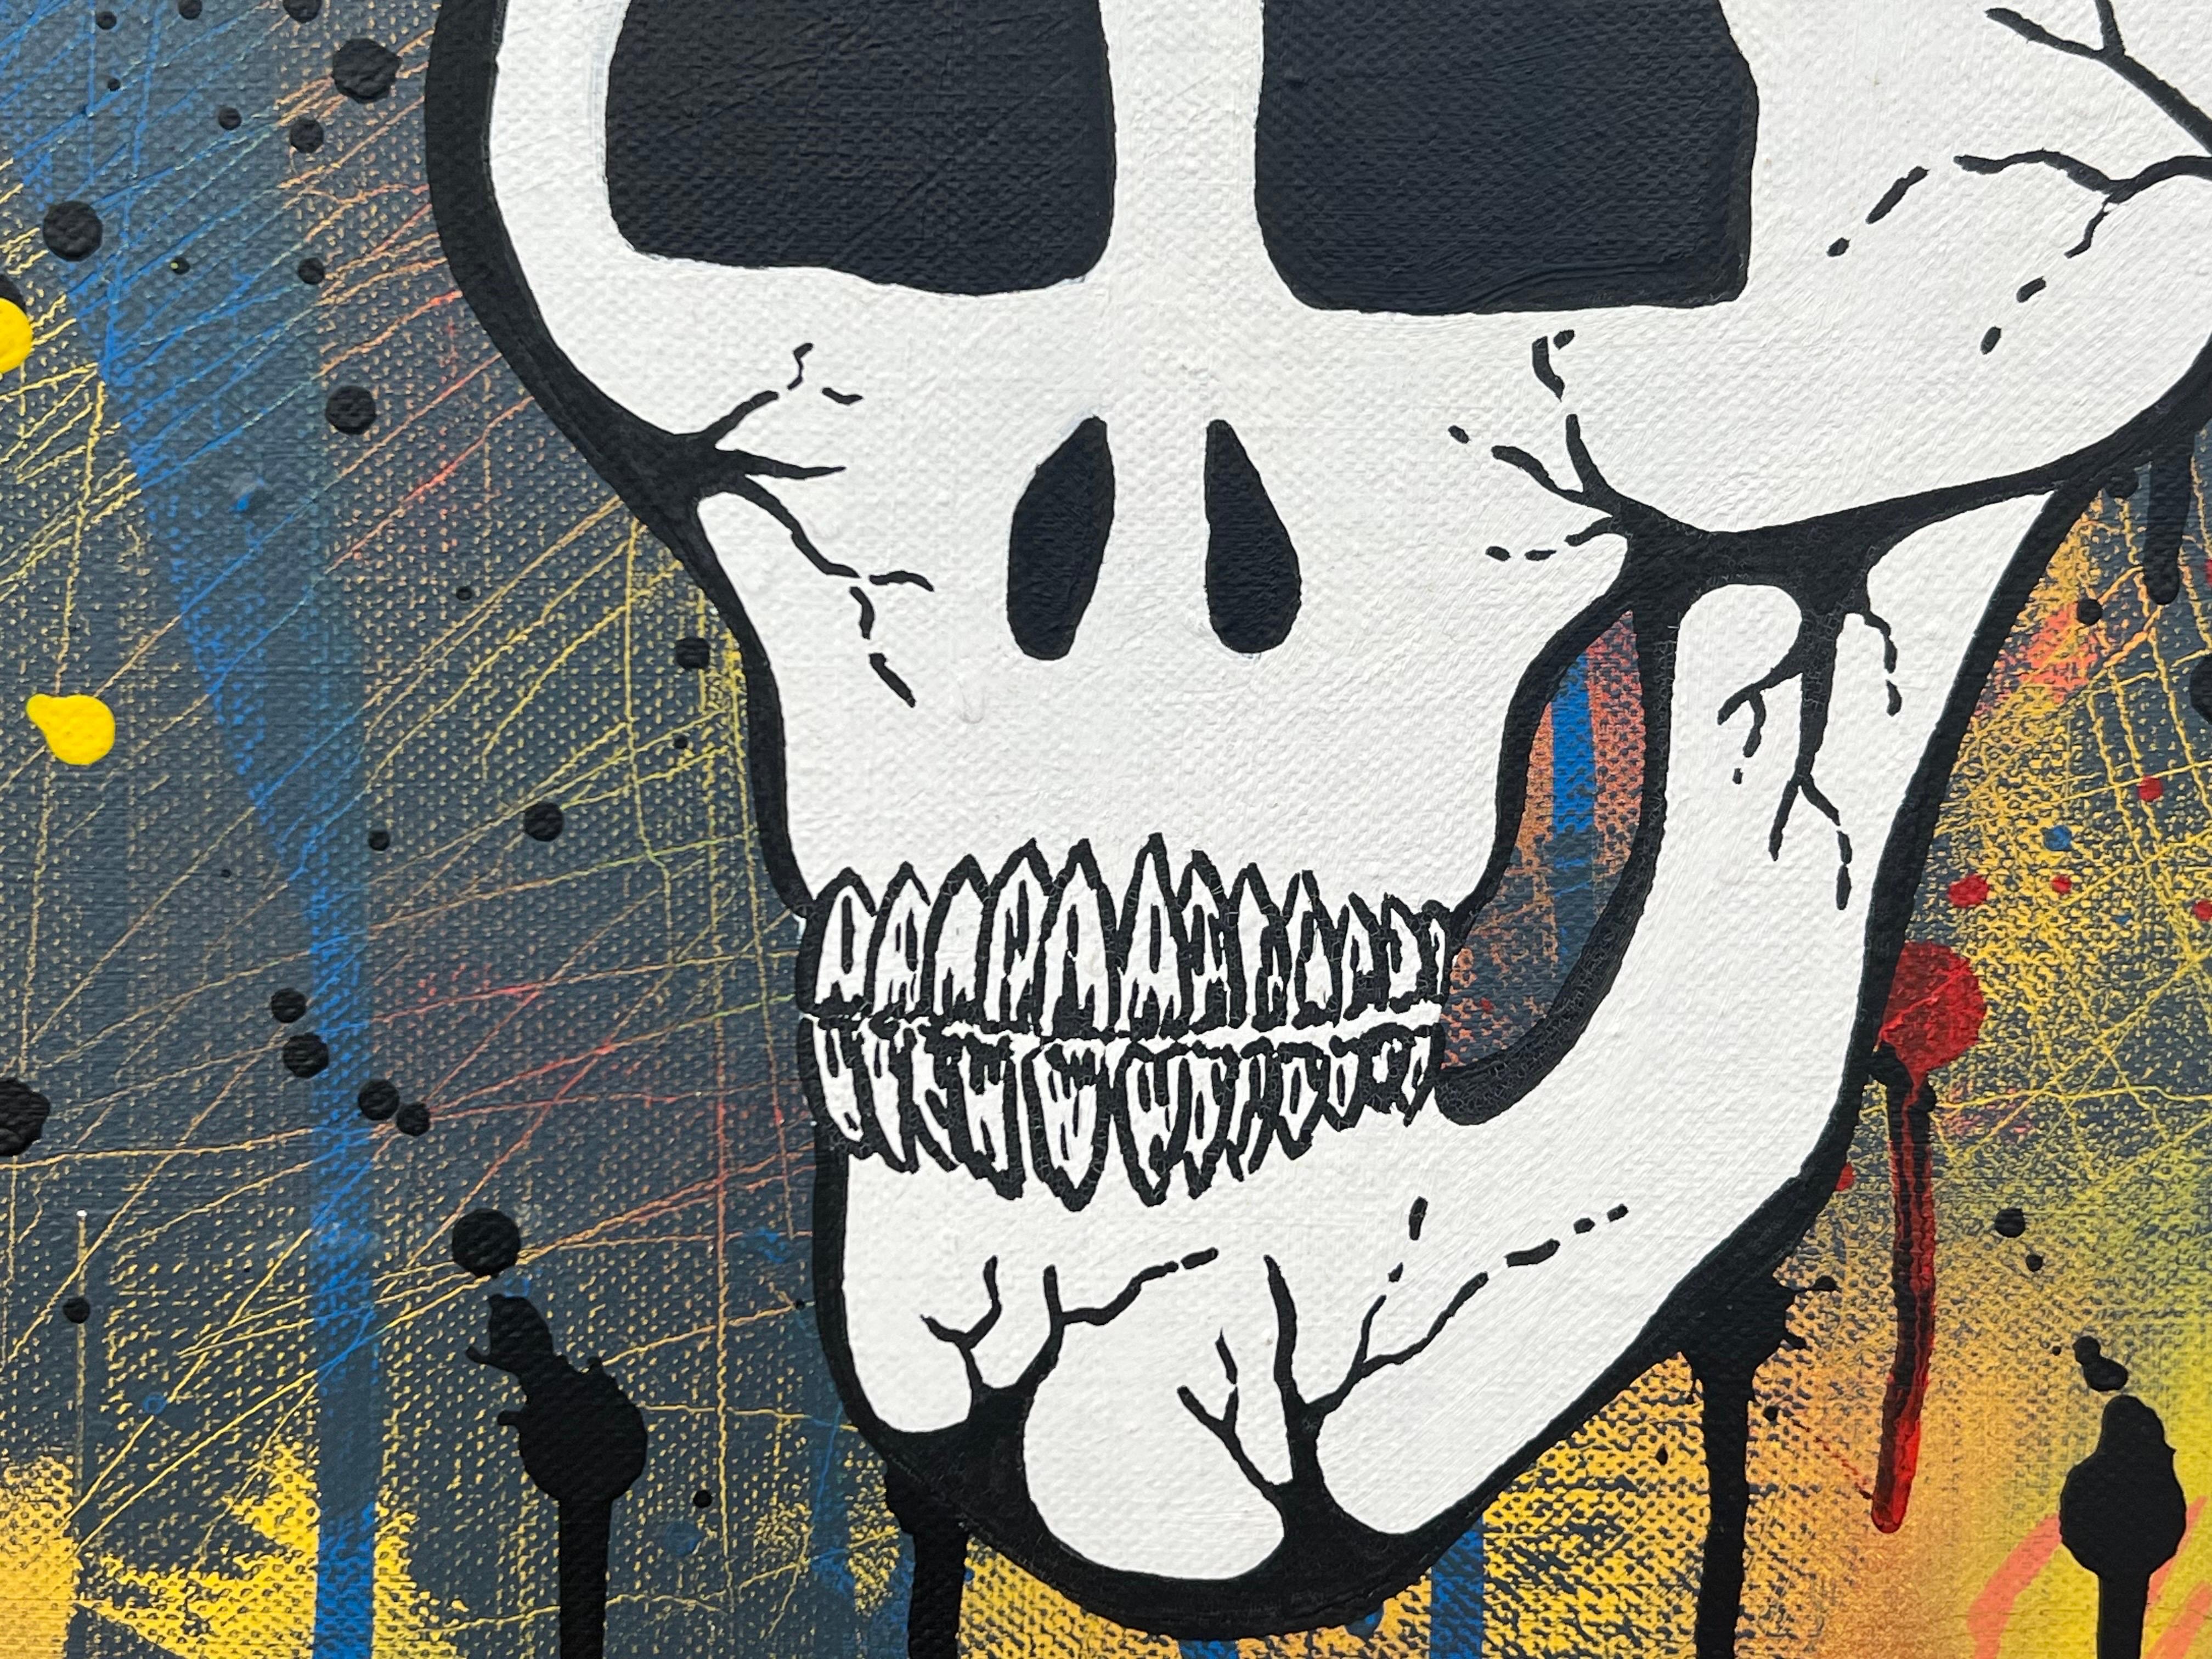 Skull and Emoji Pop Art on Abstract Background by British Graffiti Artist For Sale 8